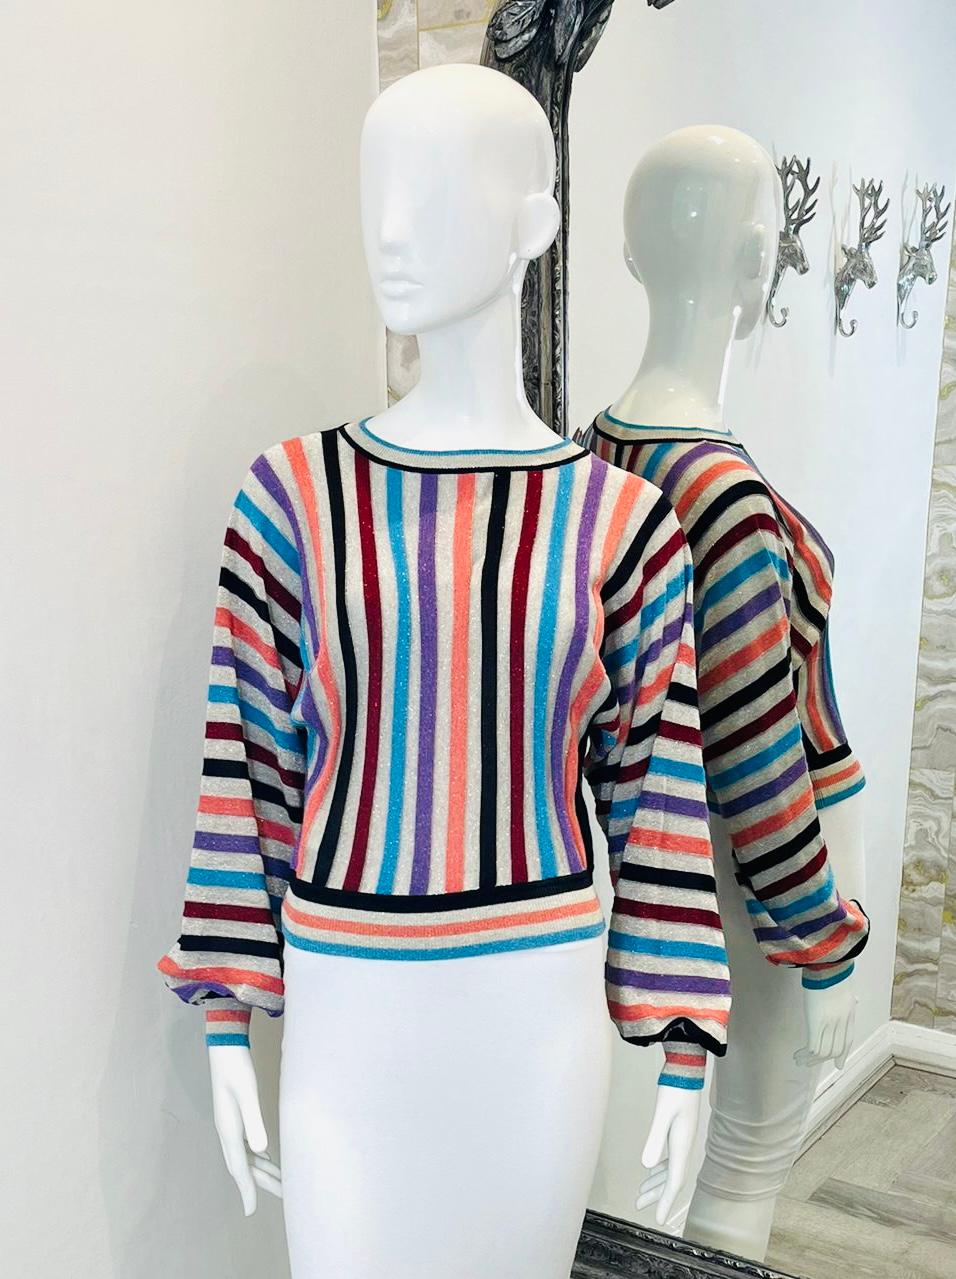 Boutique Moschino Metallic Striped Jumper

Multicoloured jumper designed with vertical metallic striped pattern.

Featuring round neckline, balloon sleeves and ribbed cuffs and hem. Rrp £268

Size – 38IT

Condition – Very Good

Composition – 70%